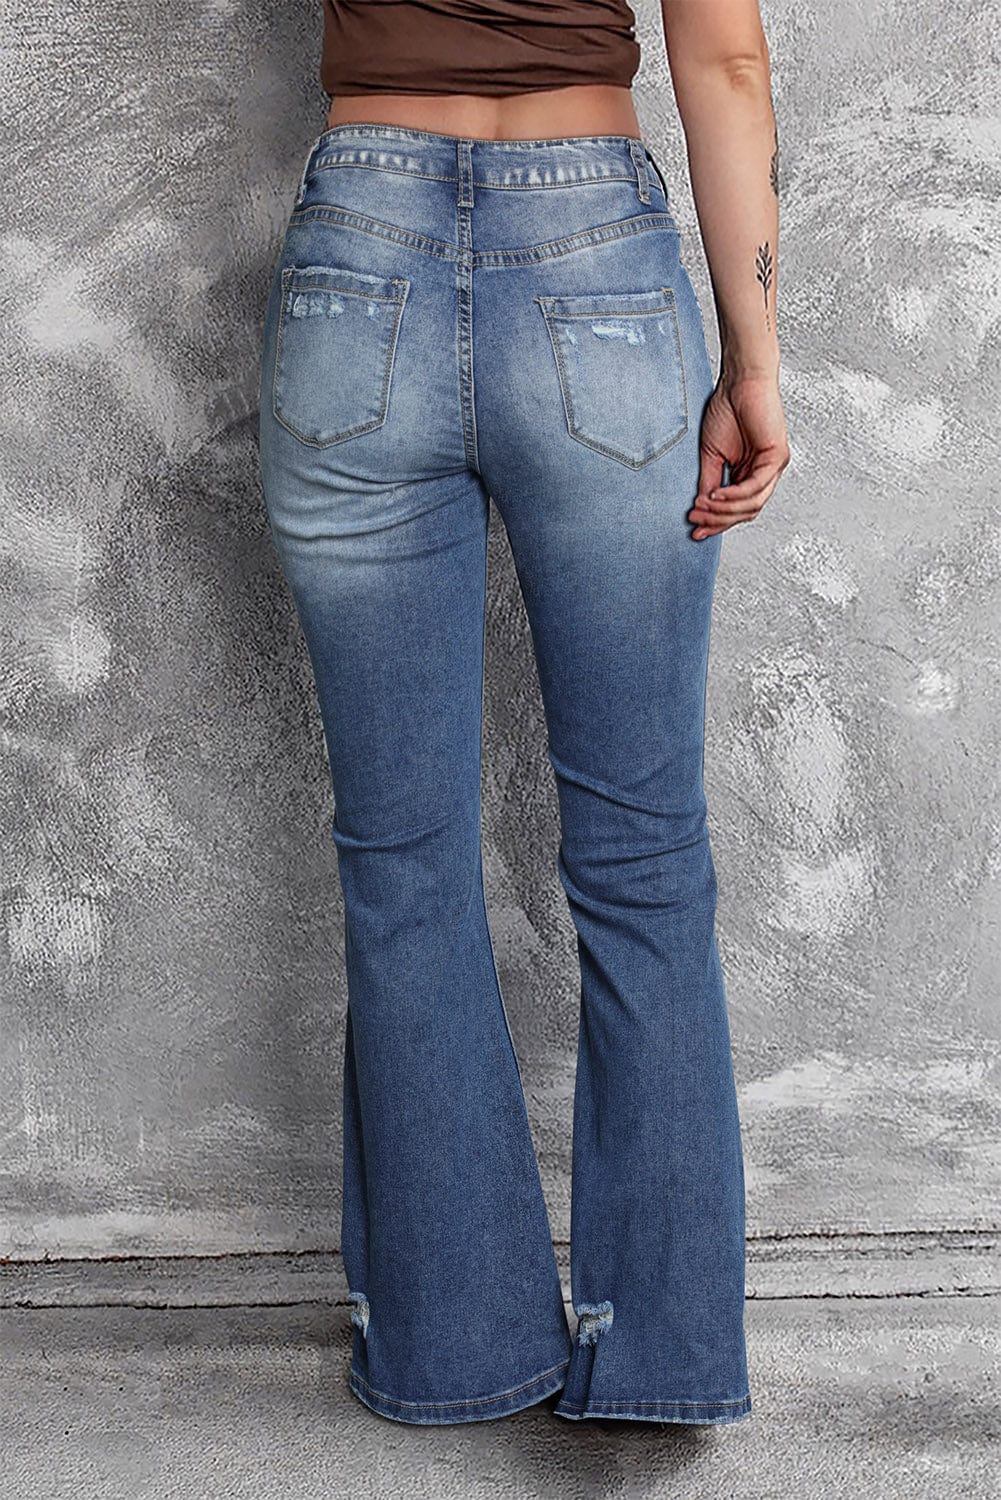 The802Gypsy  Women's Jeans Traveling Gypsy Distressed Flare Jeans